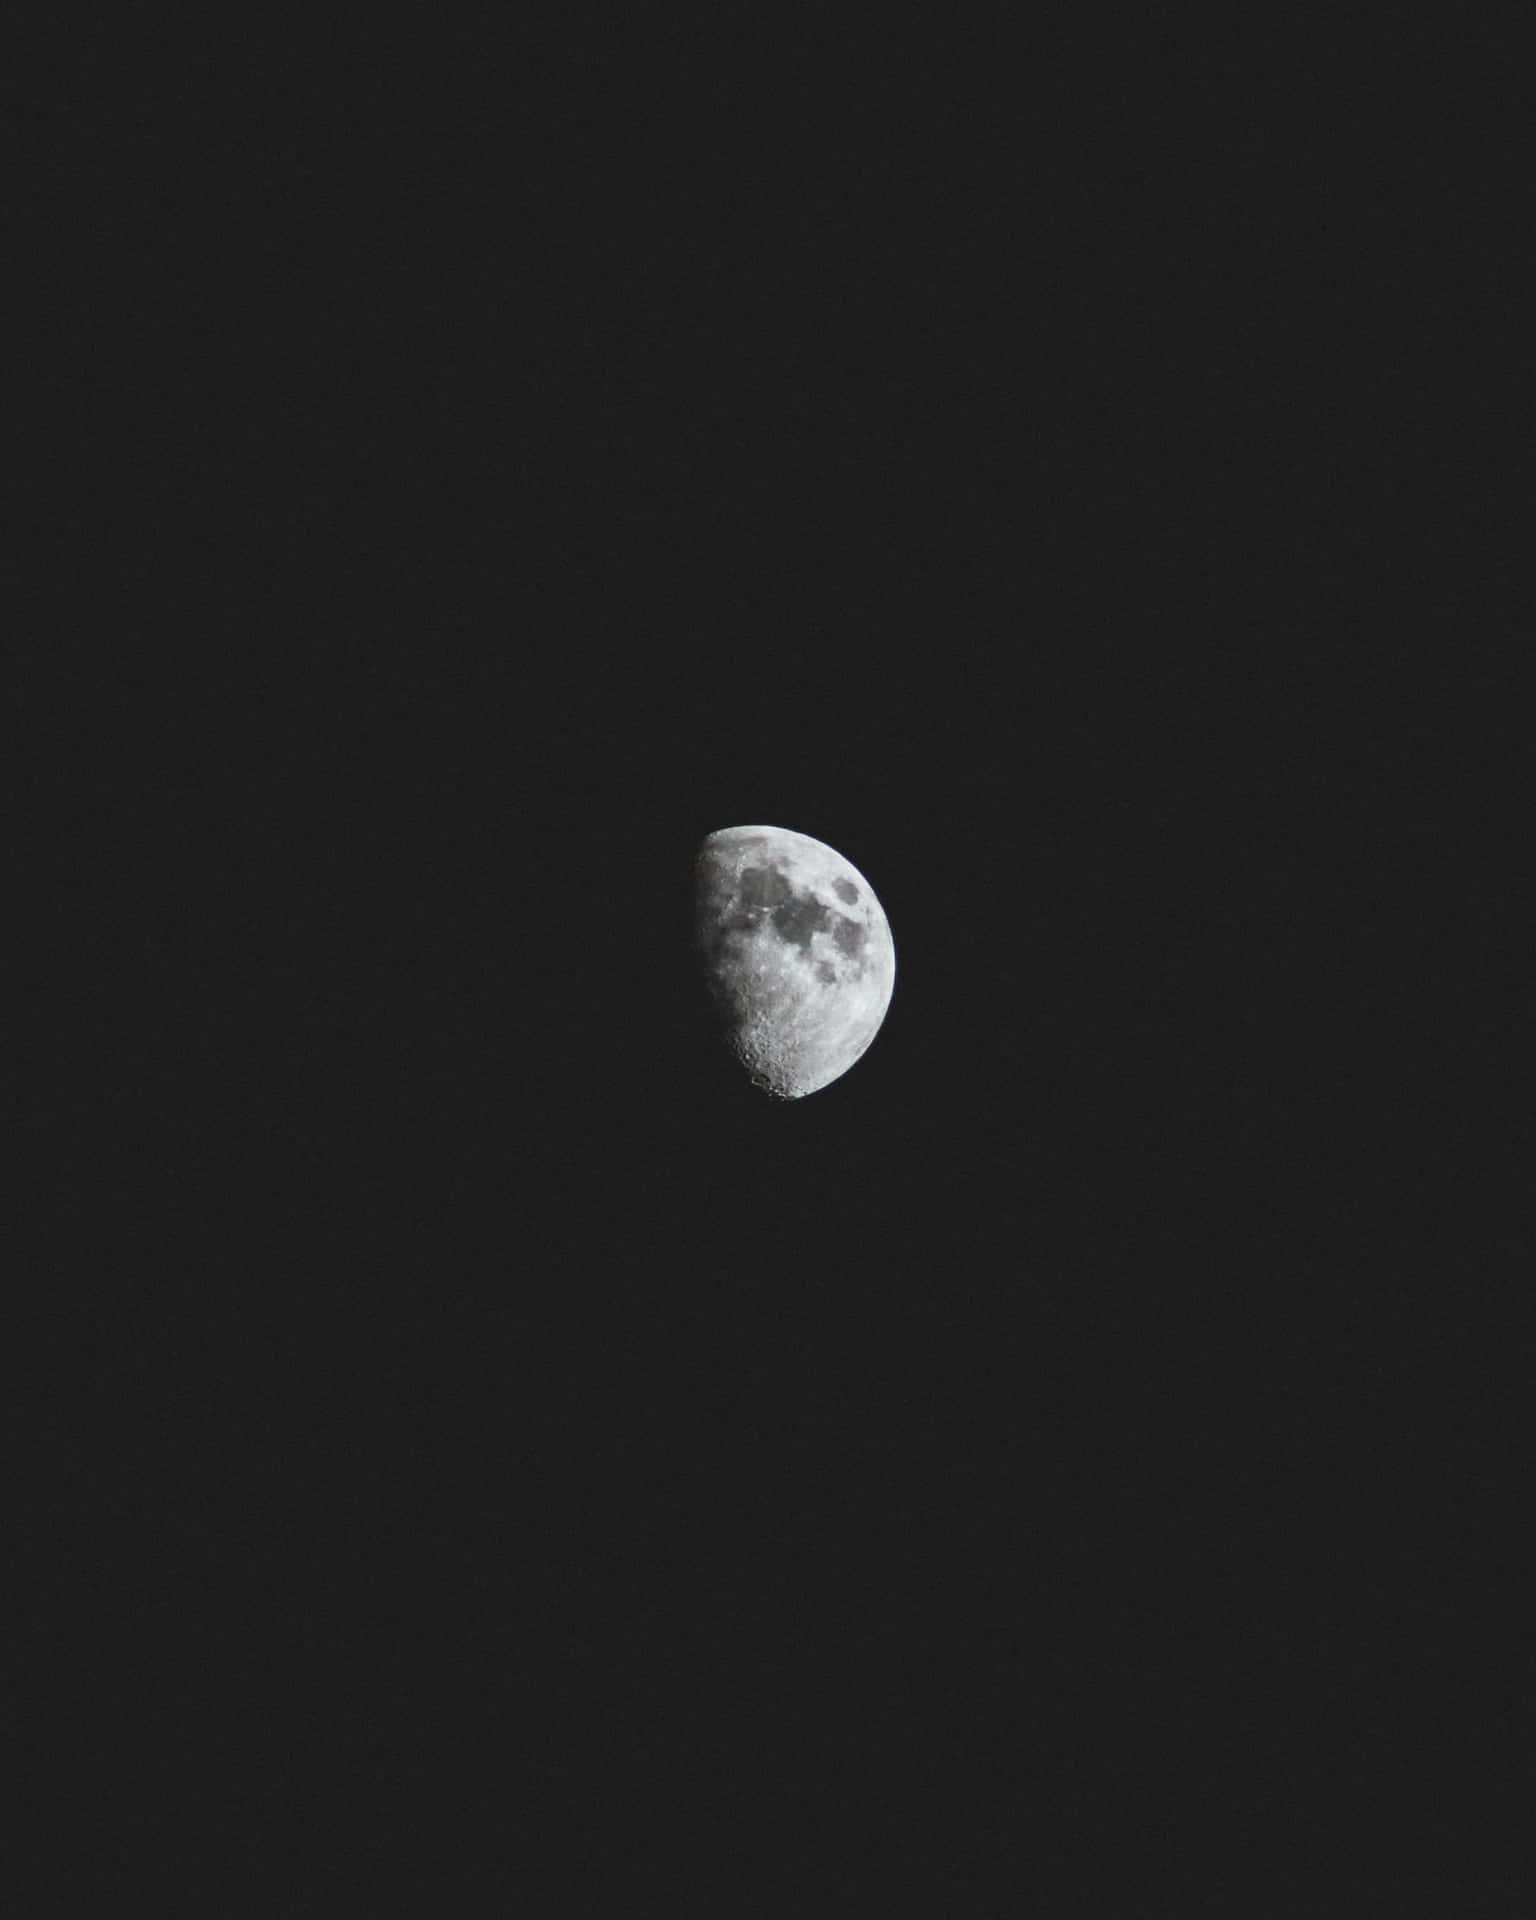 A Black And White Photo Of The Moon